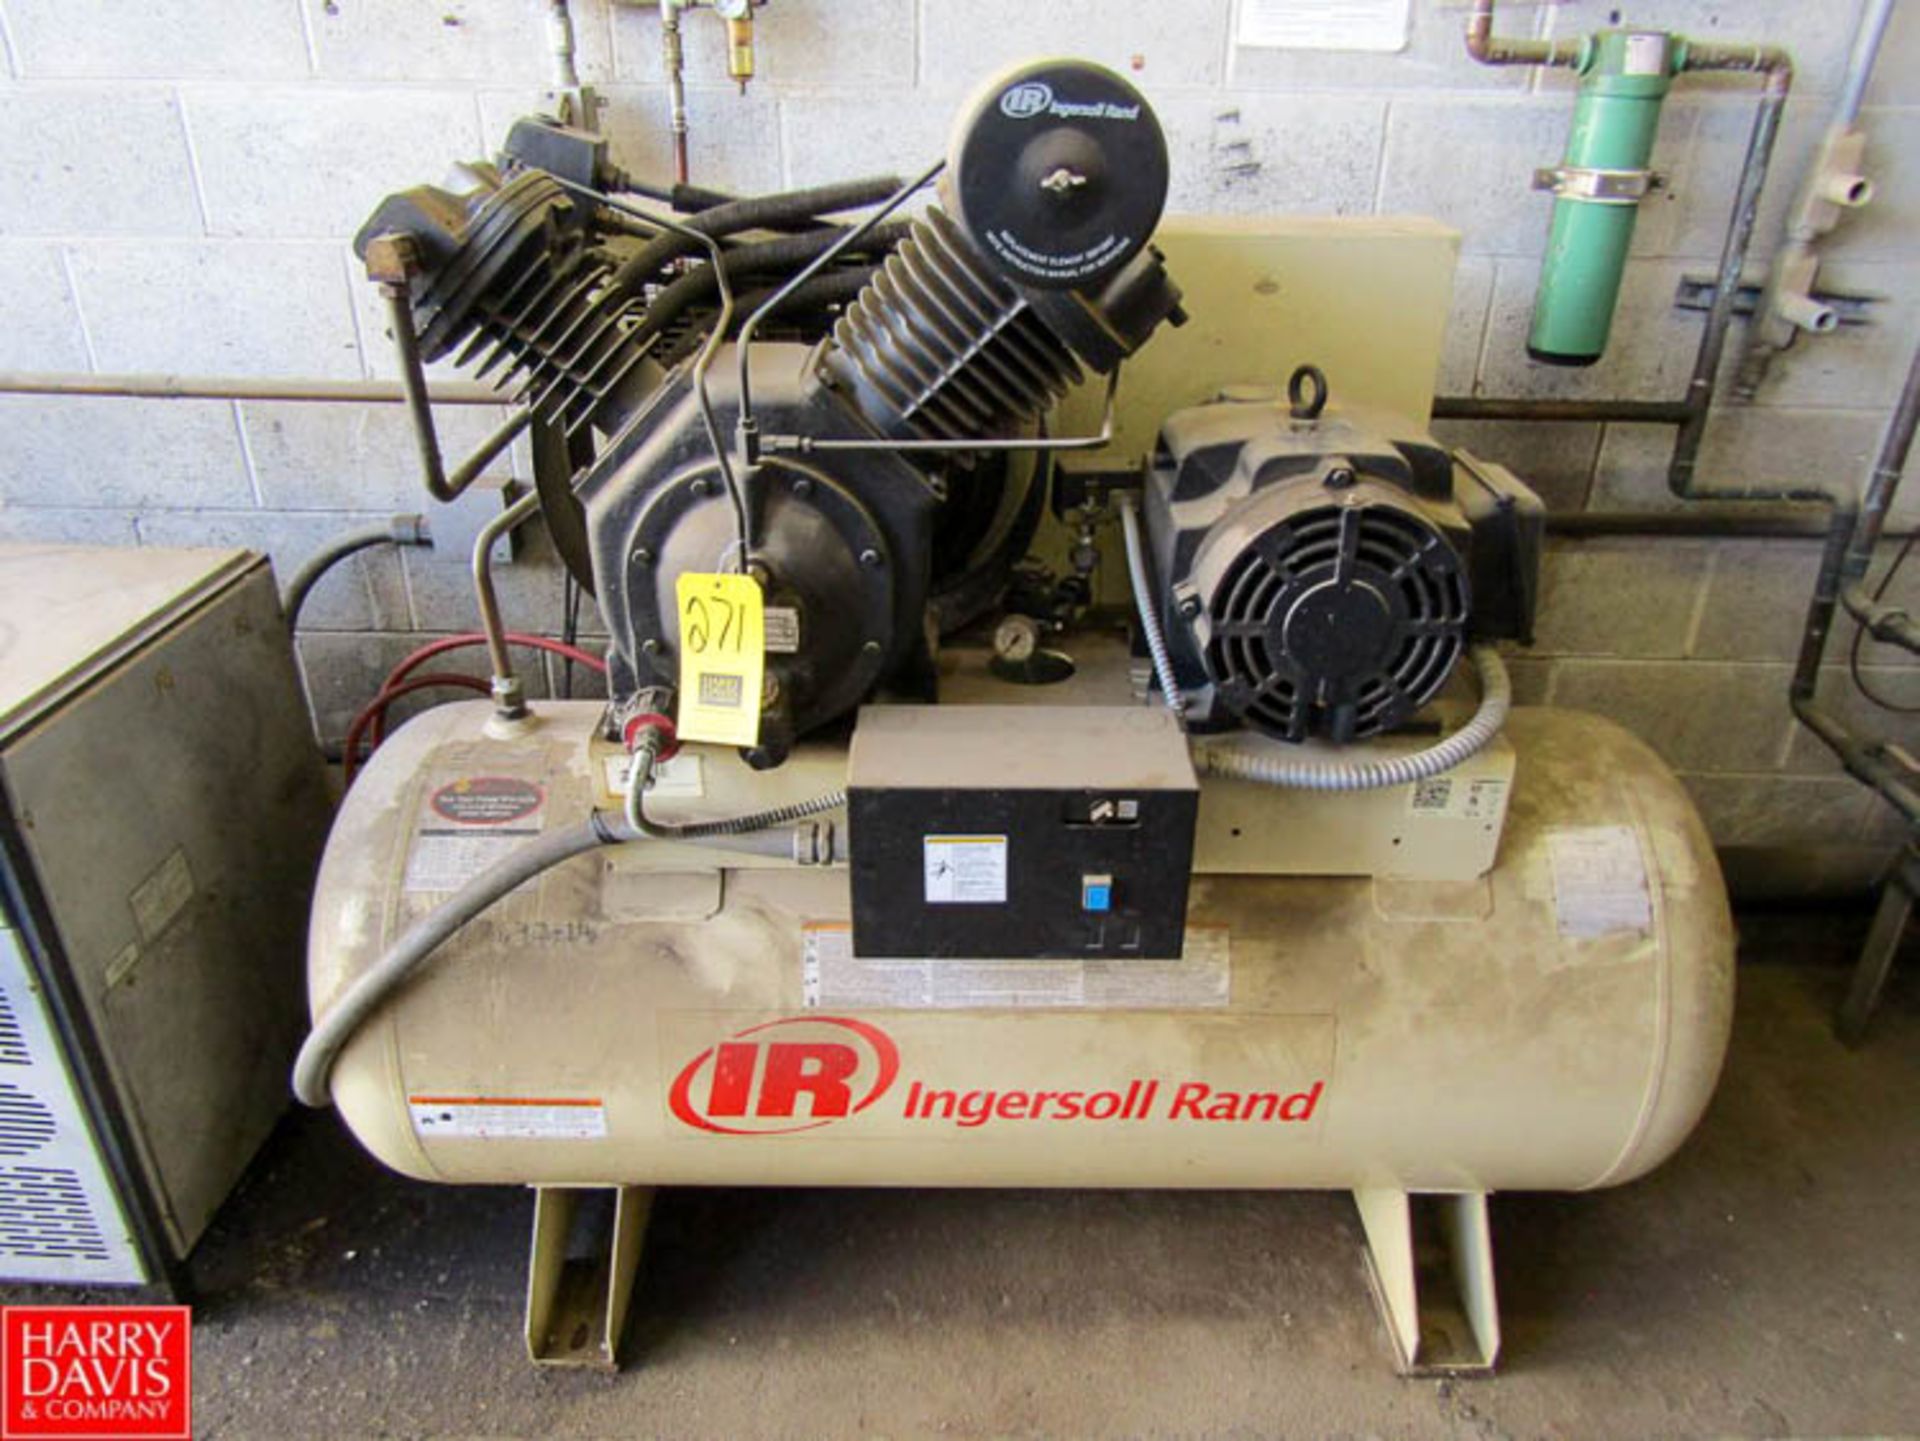 Ingersoll Rand 15 HP Air Compressor with Tank : SN CBV294863 Rigging Fee: $ 100